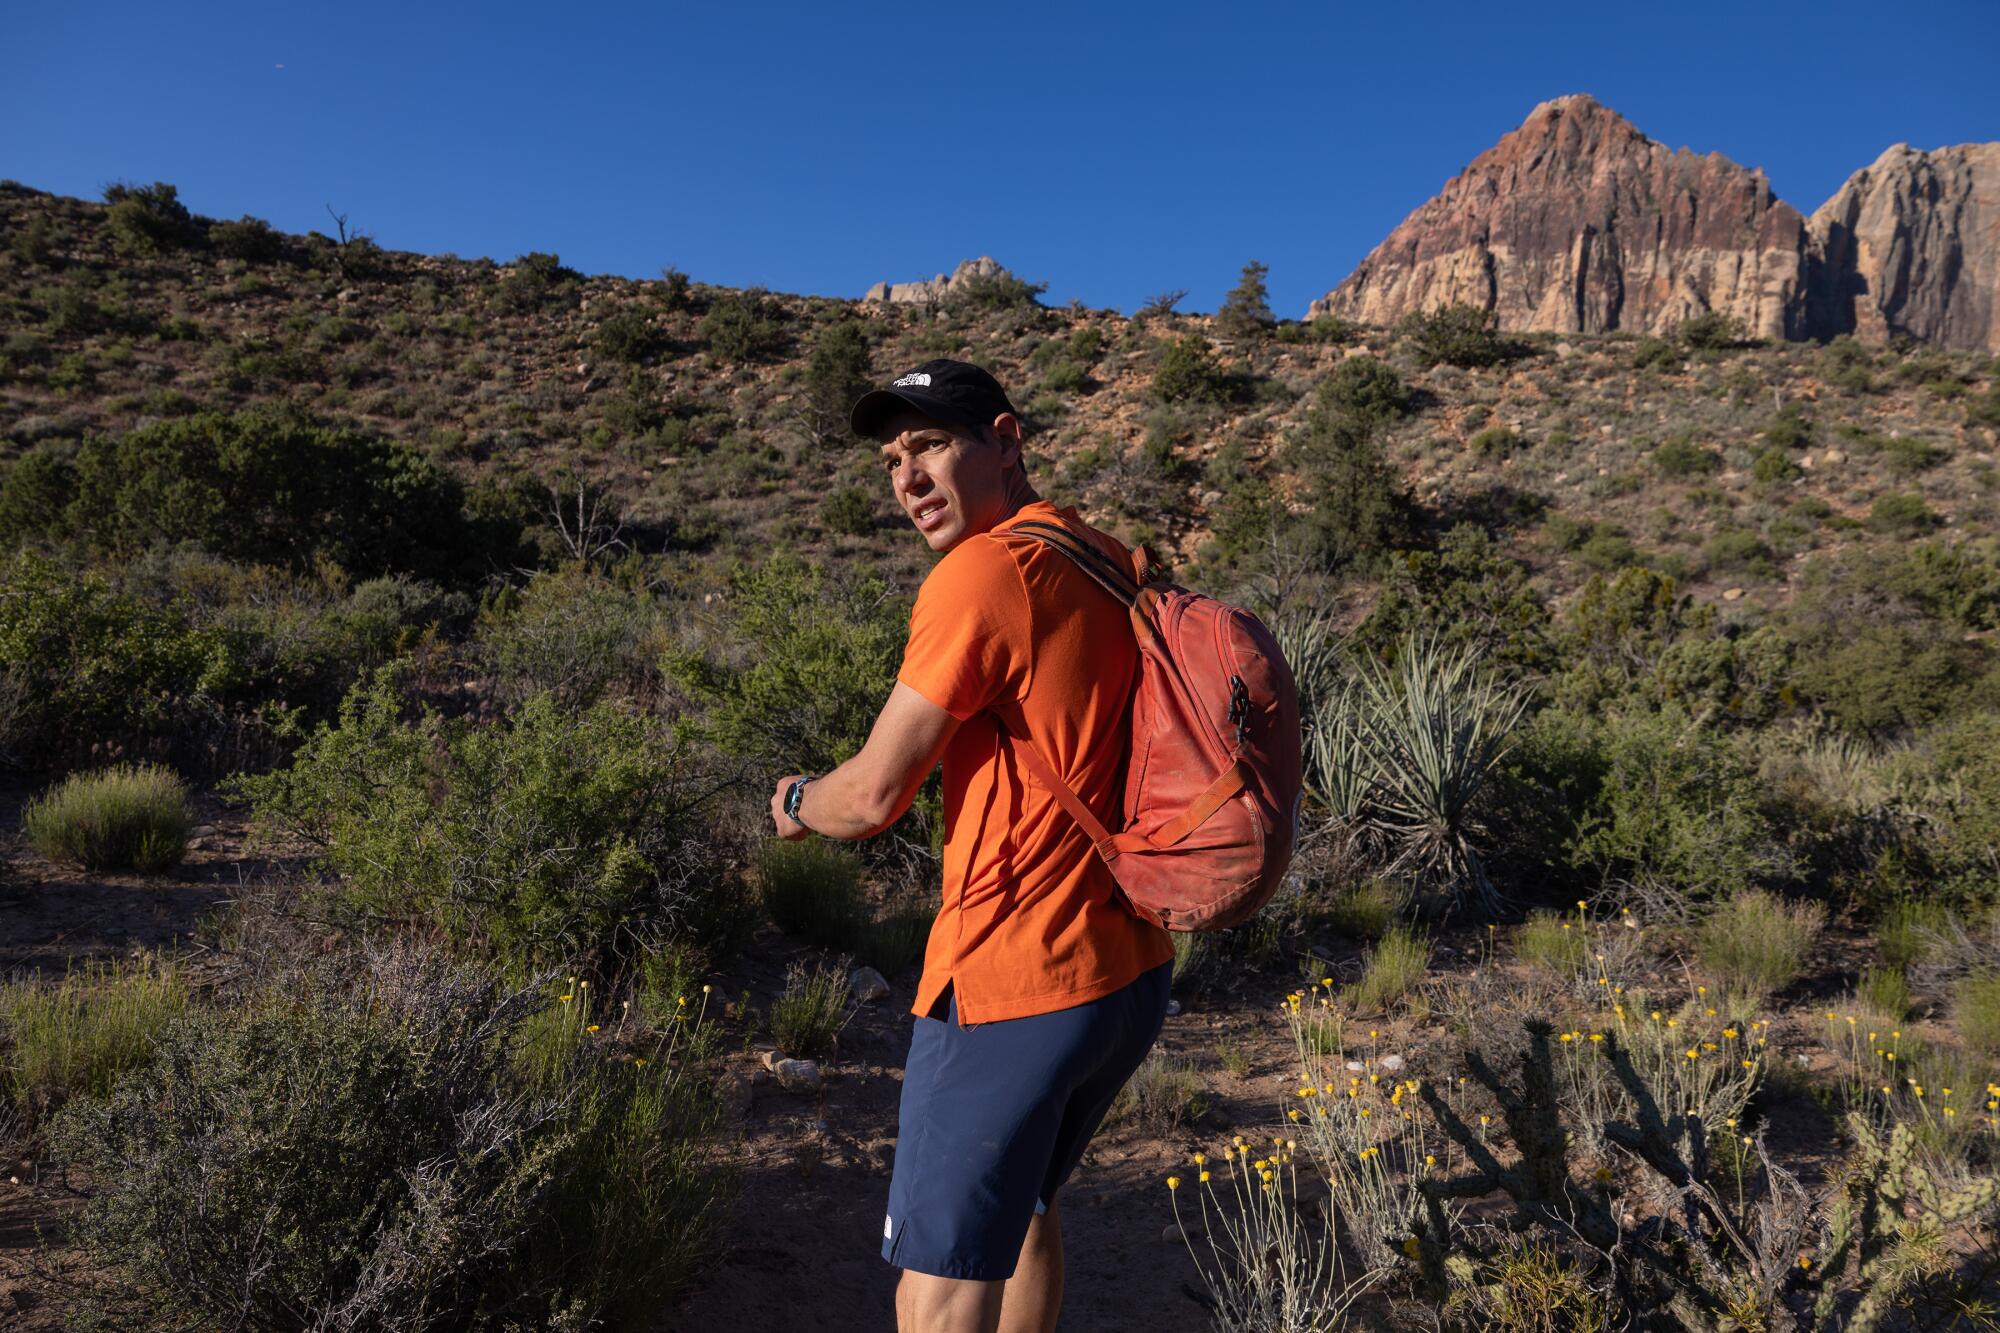 A fit man in T-shirt and shorts prepares to hike up a shrub-covered hillside. 